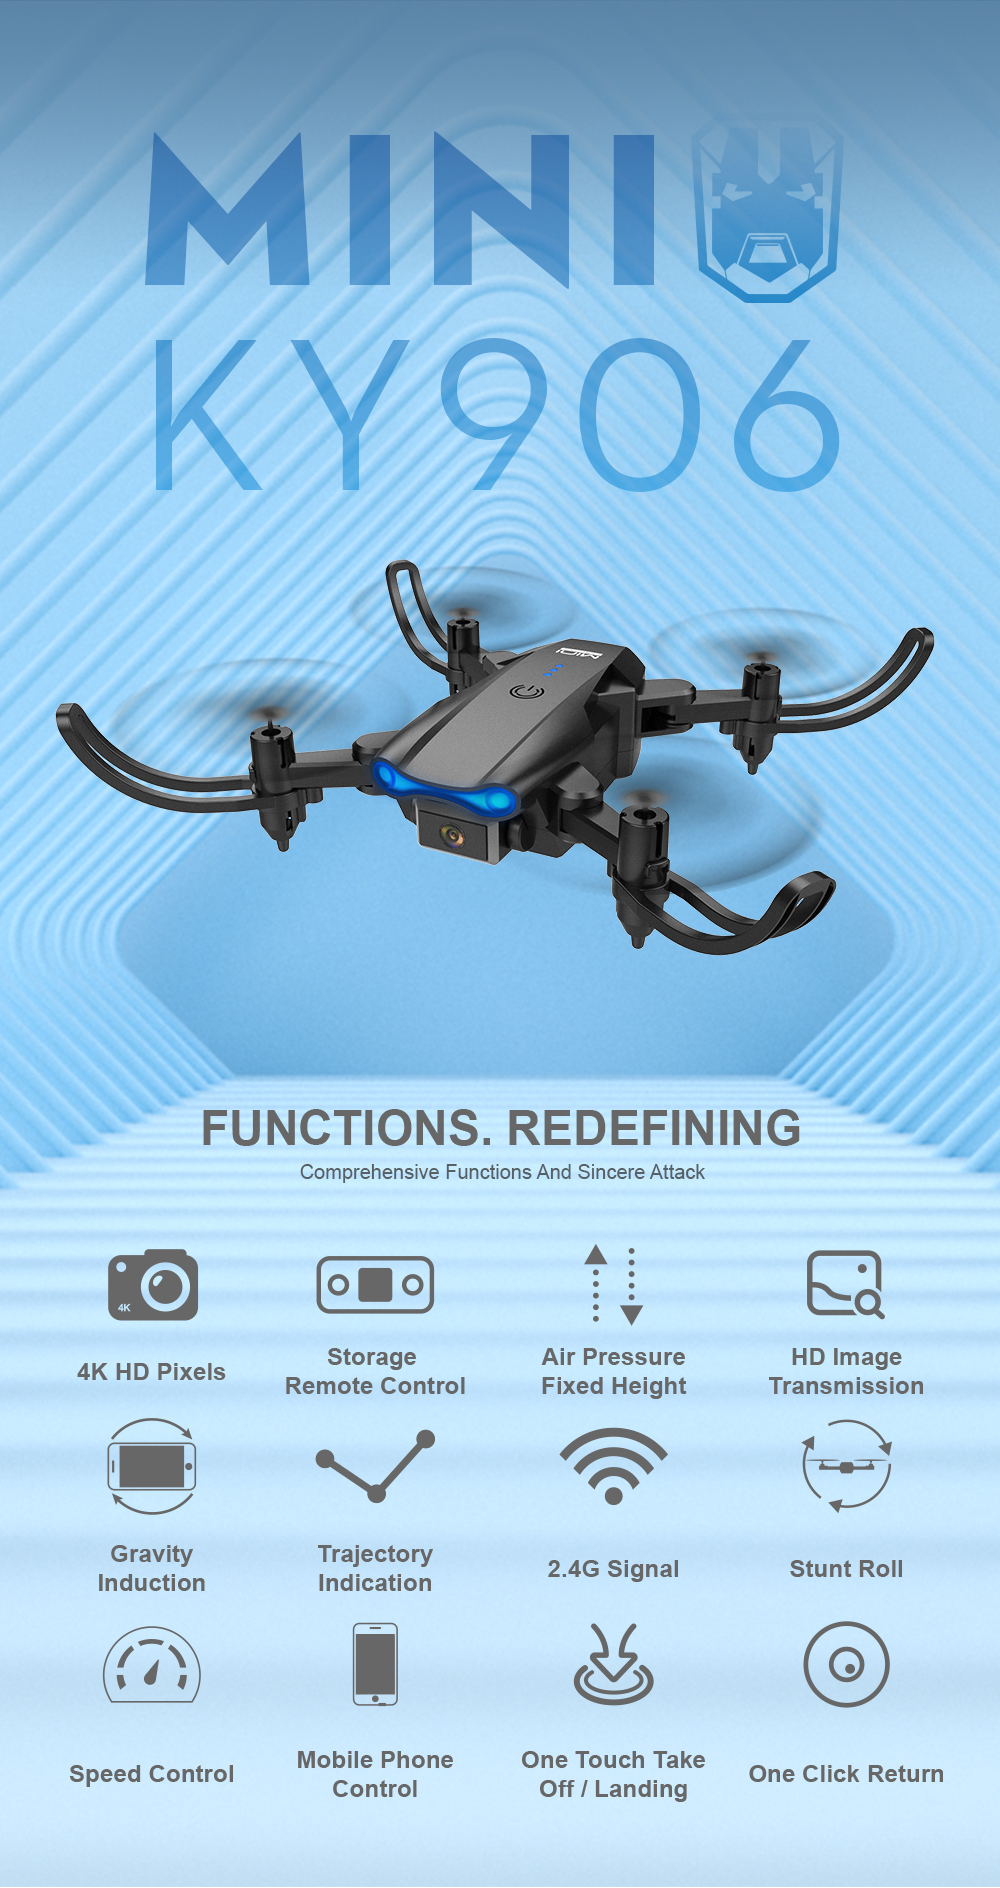 KY906-Mini-Drone-WiFi-FPV-with-4K-Camera-360deg-Rolling-Altitude-Hold-Foldable-RC-Quadcopter-RTF-1904399-1